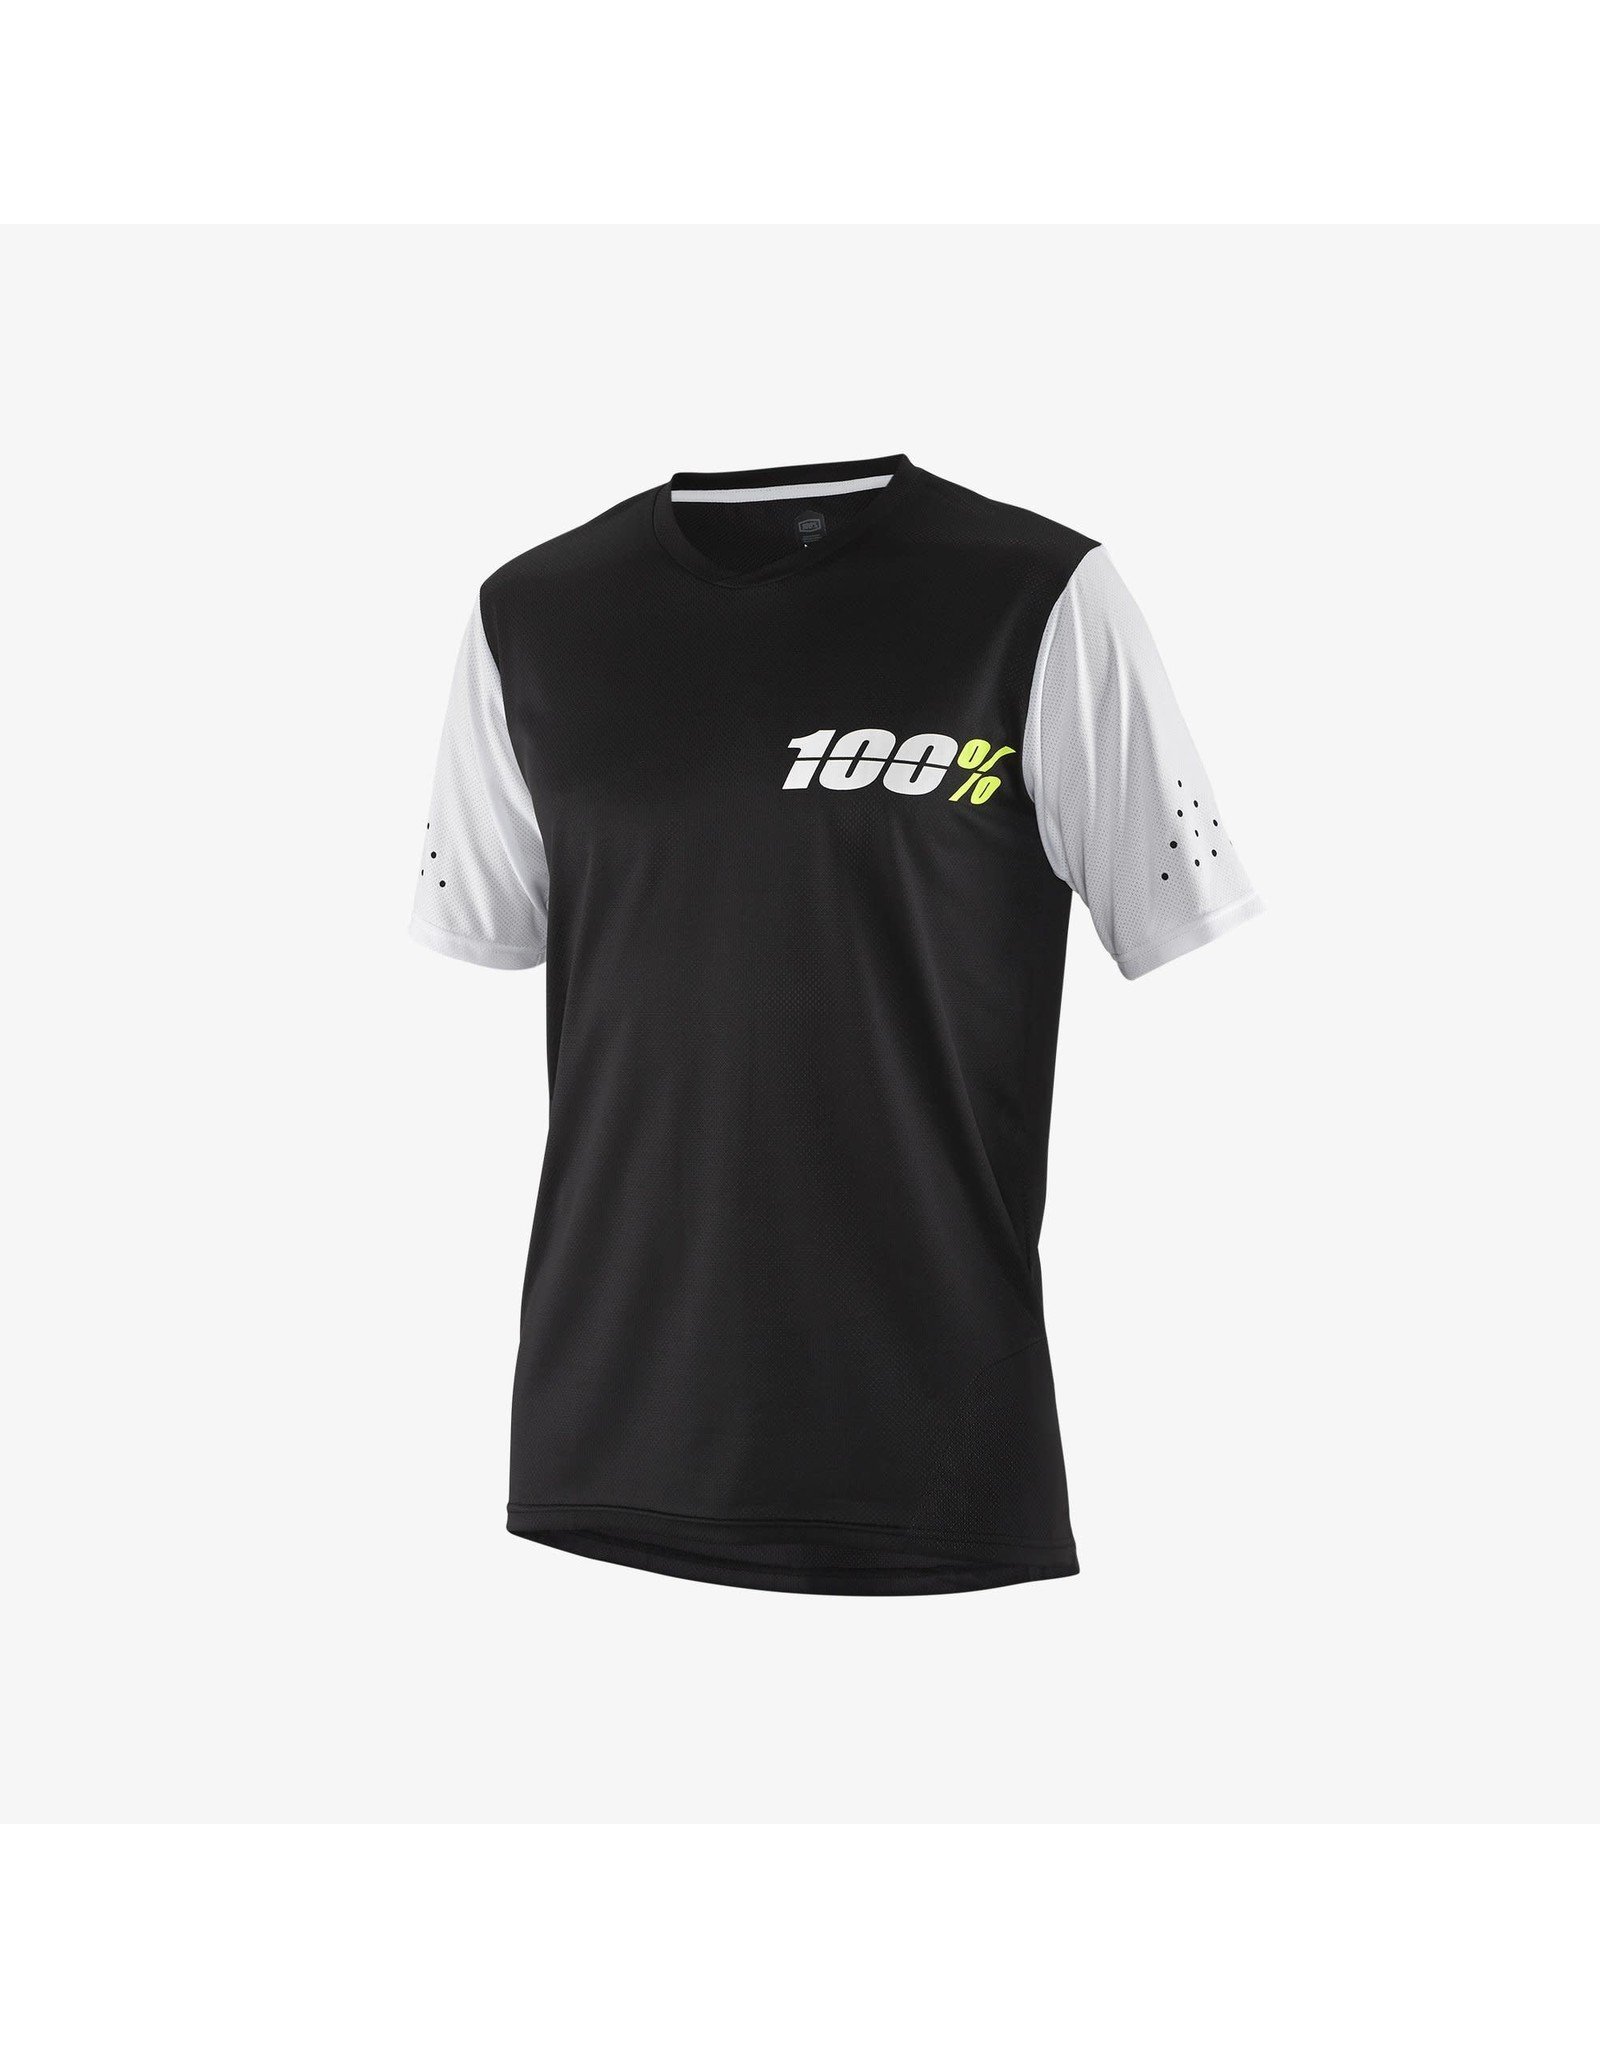 100% 100% Ridecamp Youth Jersey Black